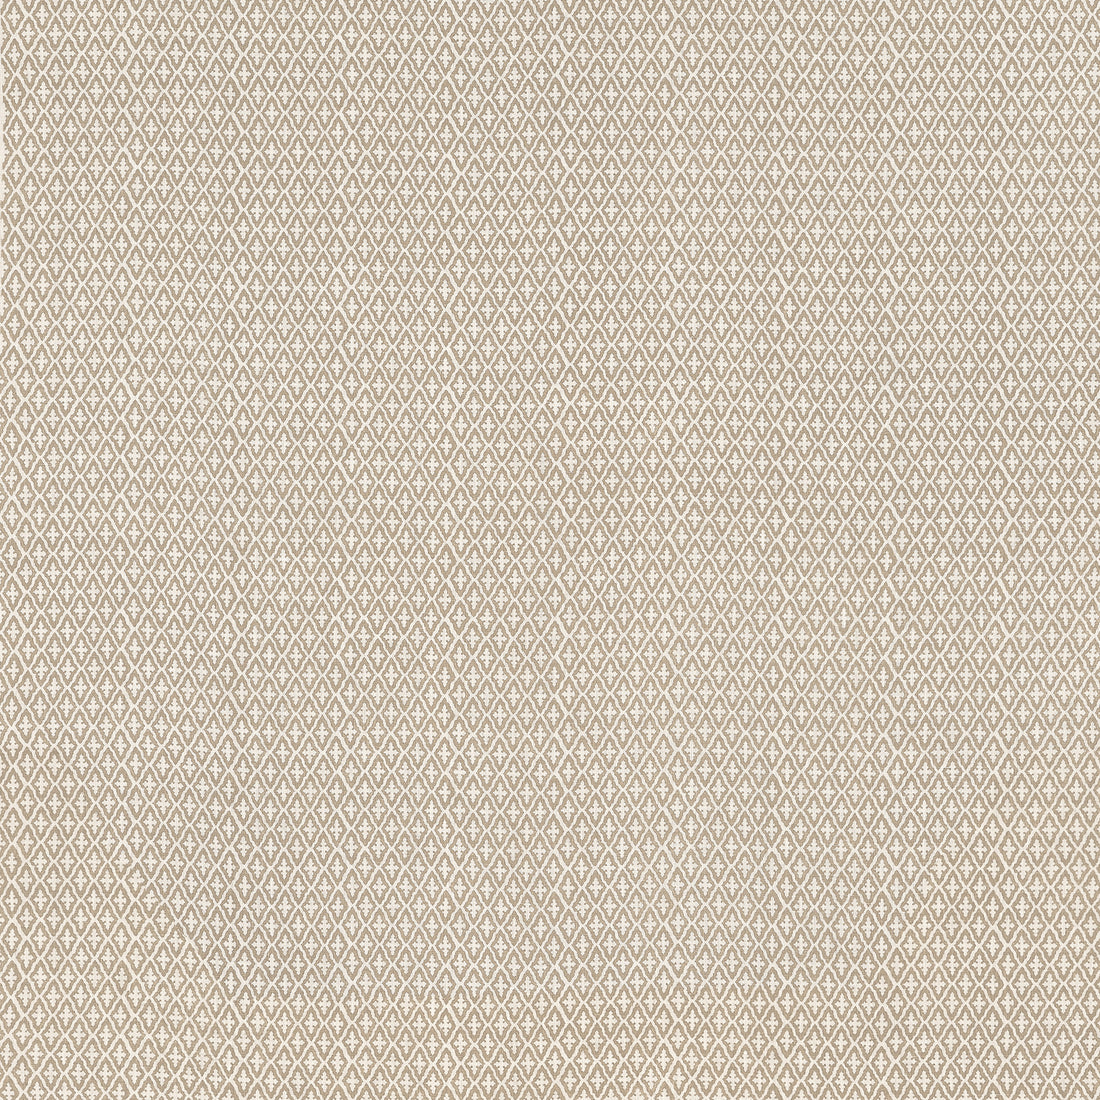 Lindsey fabric in sand color - pattern number AF57809 - by Anna French in the Bristol collection